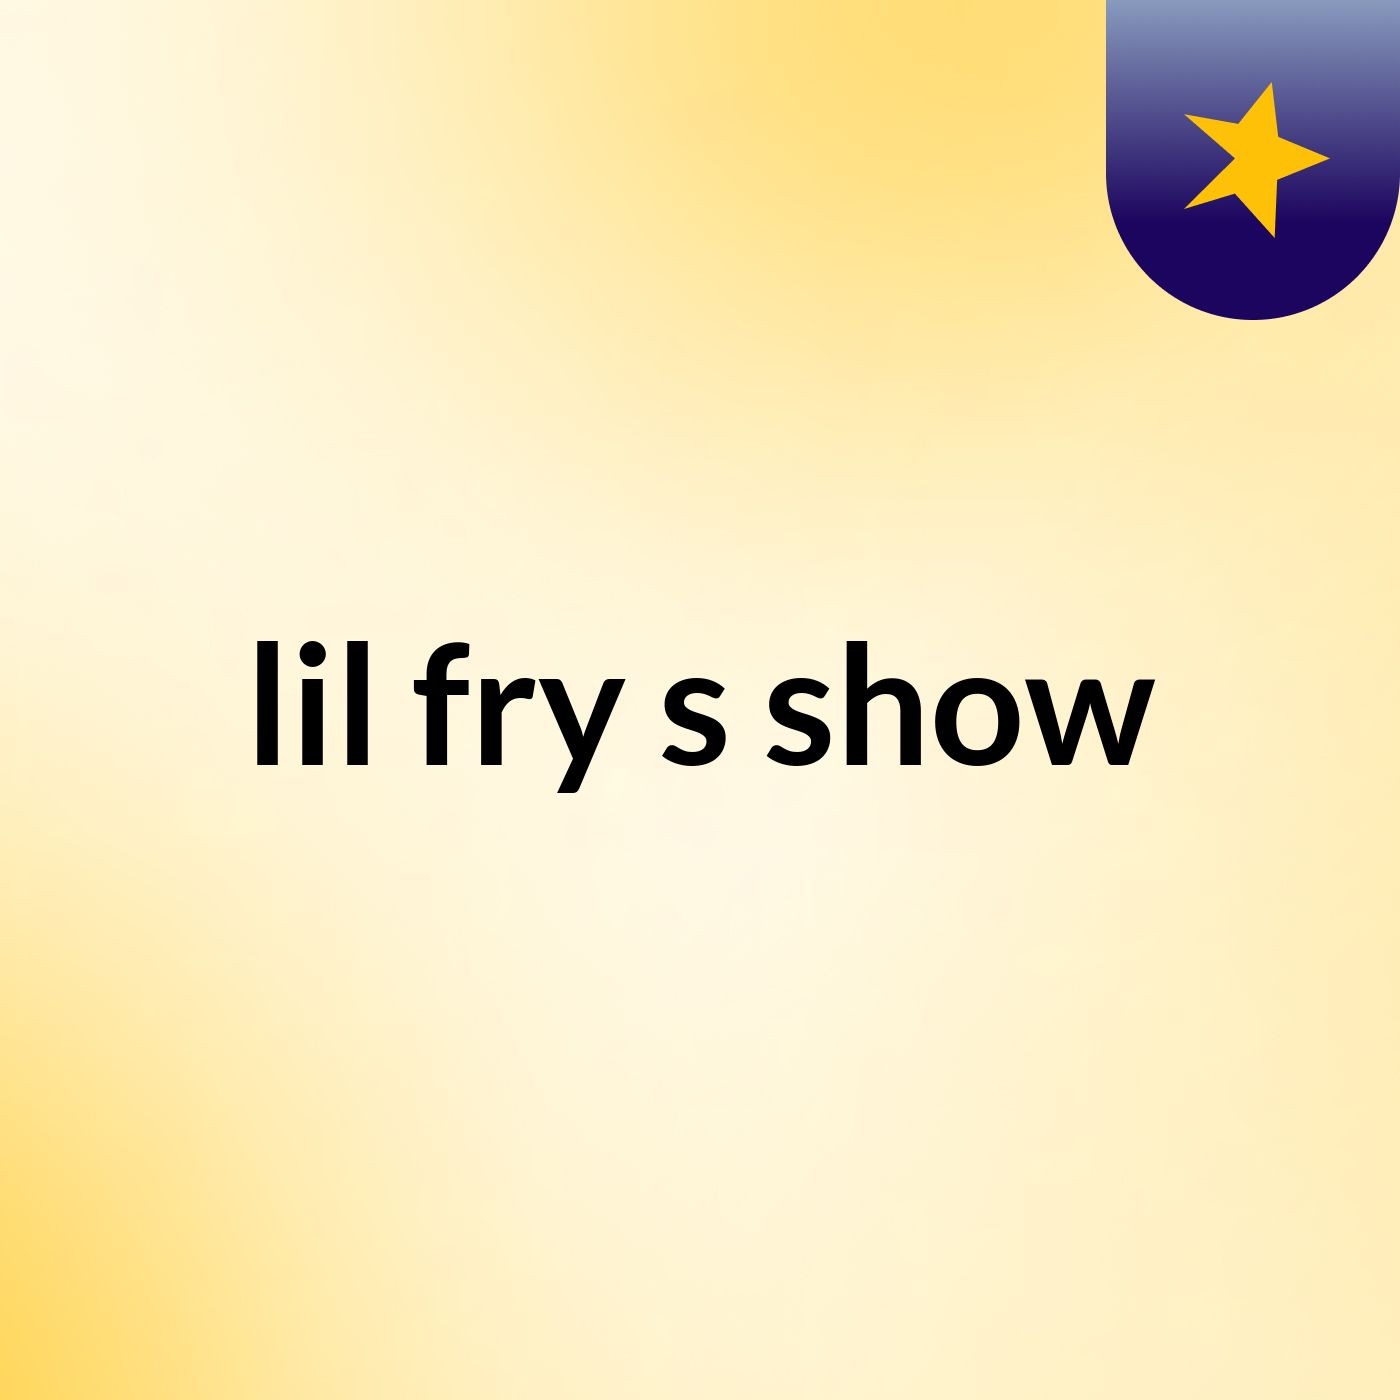 lil fry's show